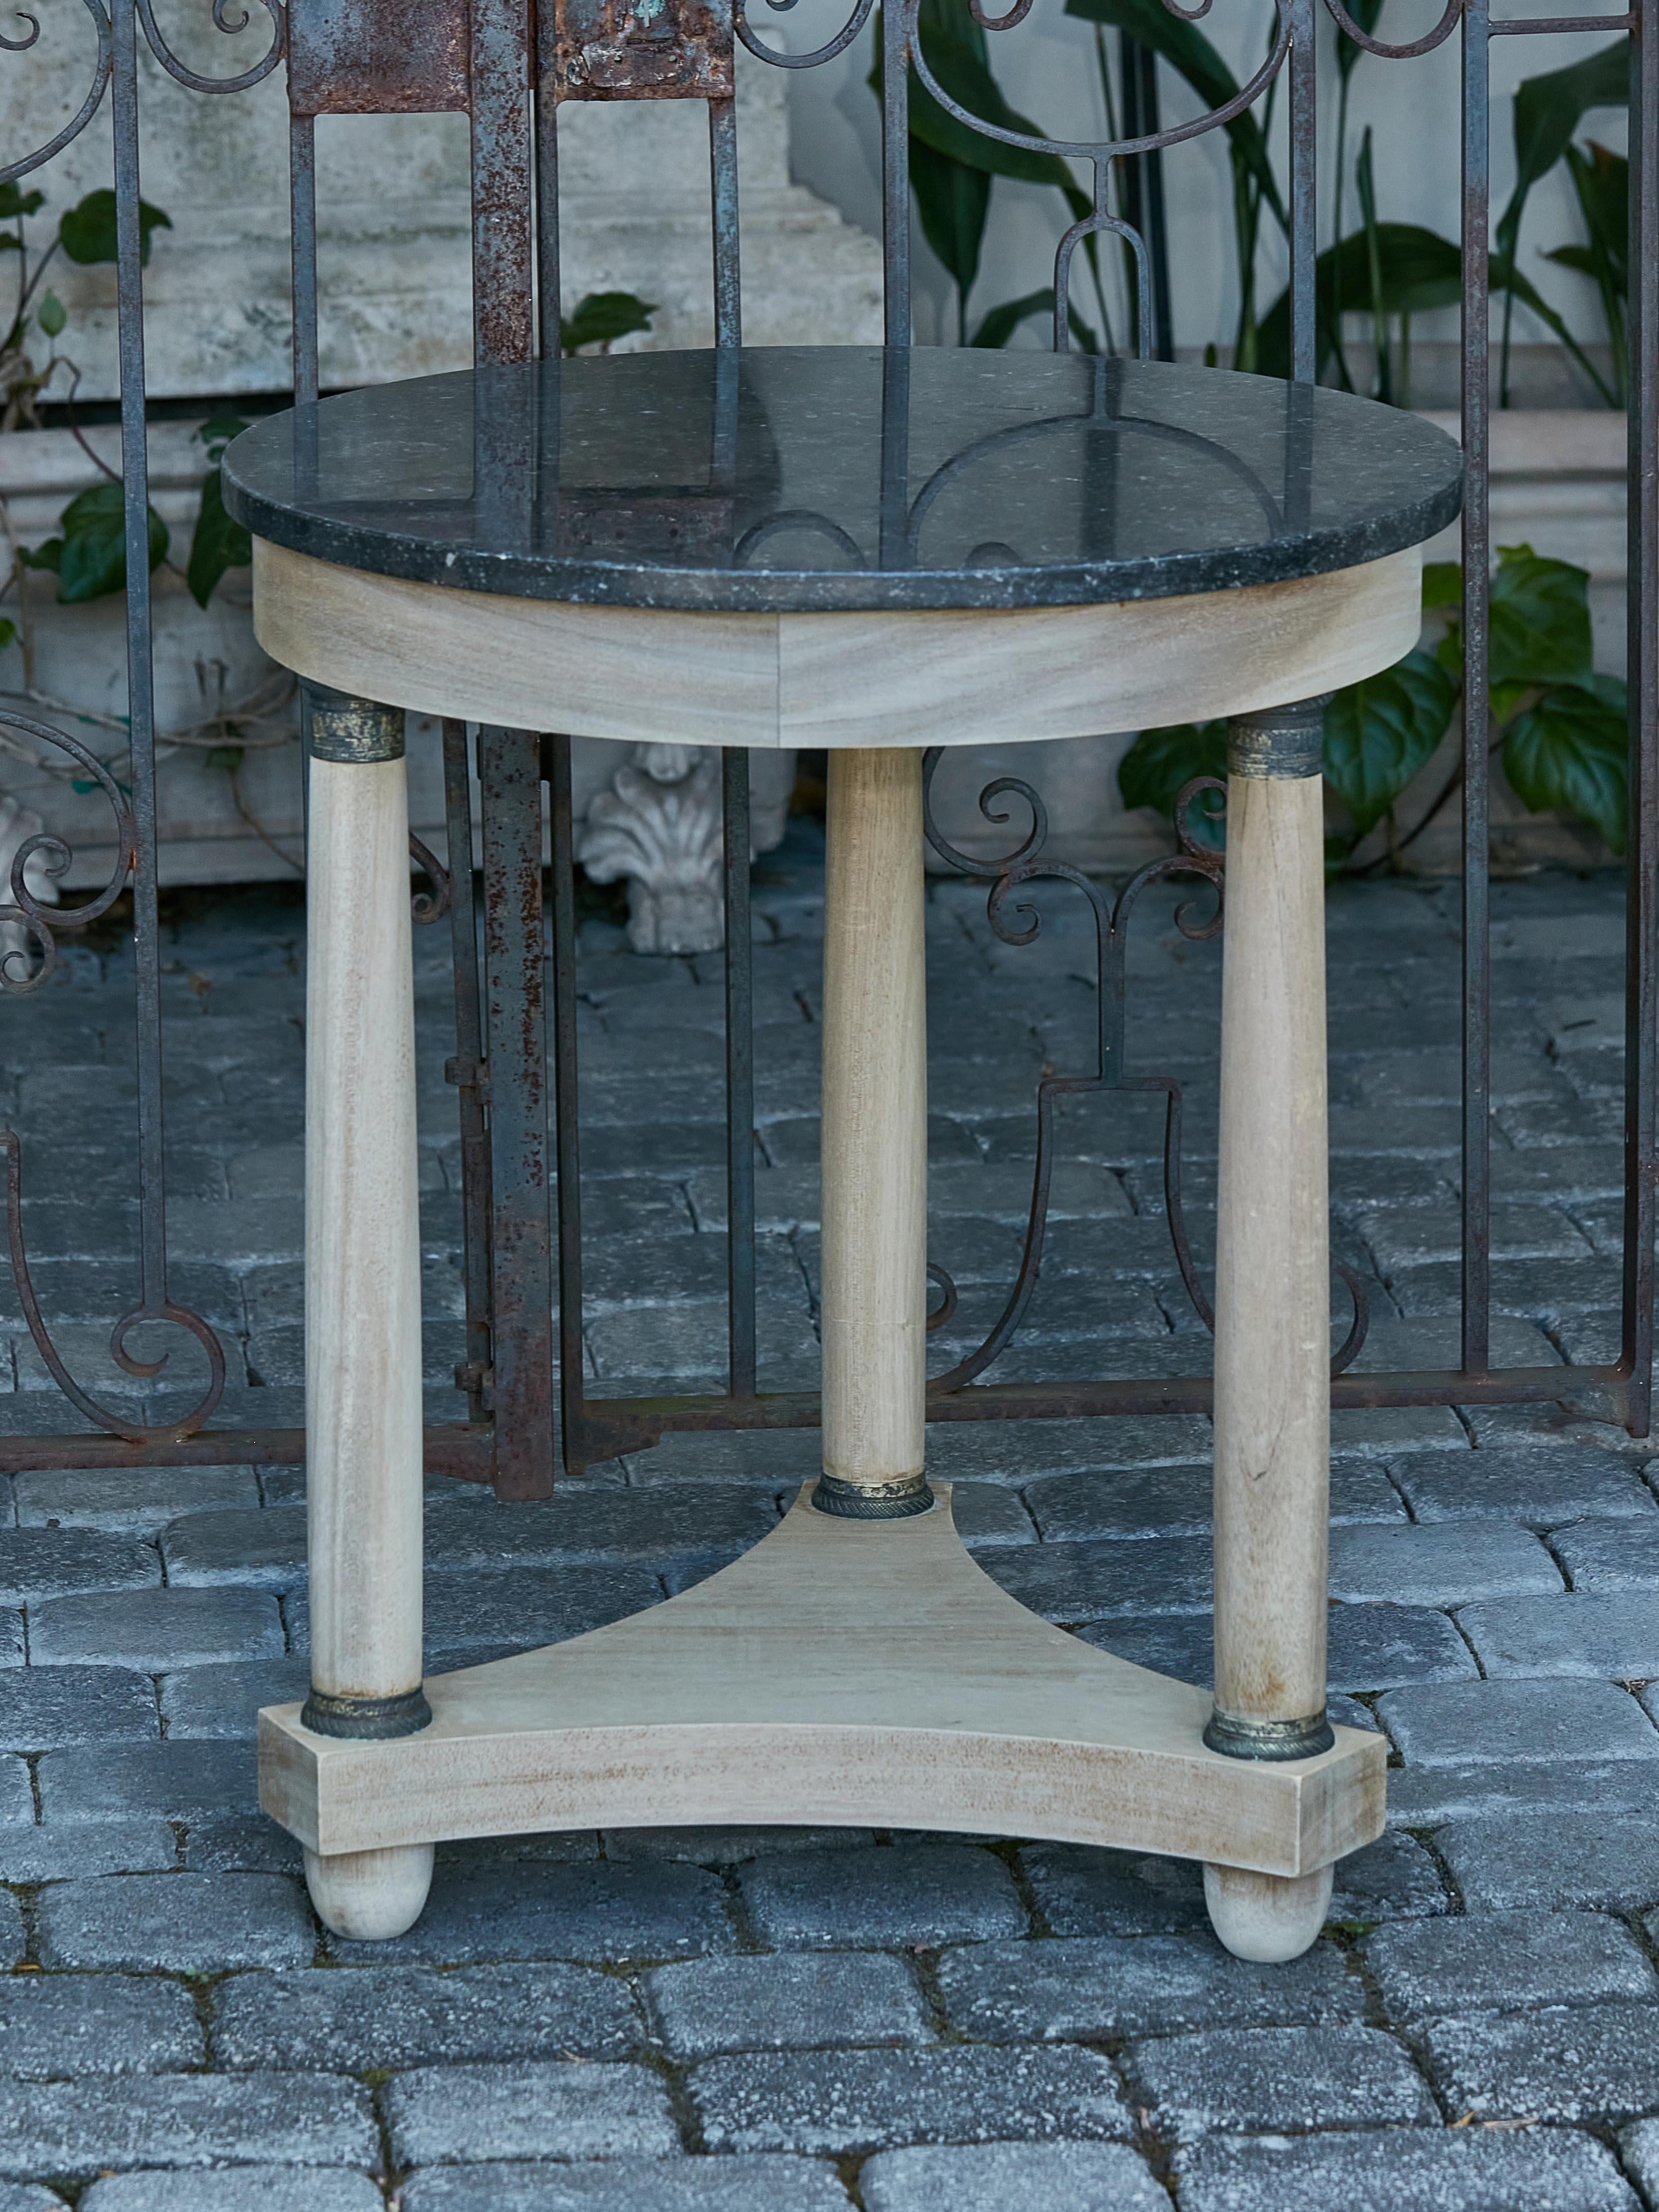 A French Empire style bleached wood side table from the 19th century with black marble top, three column legs, in-curving tripartite base and petite feet. Bask in the timeless allure of French sophistication with this 19th-century French